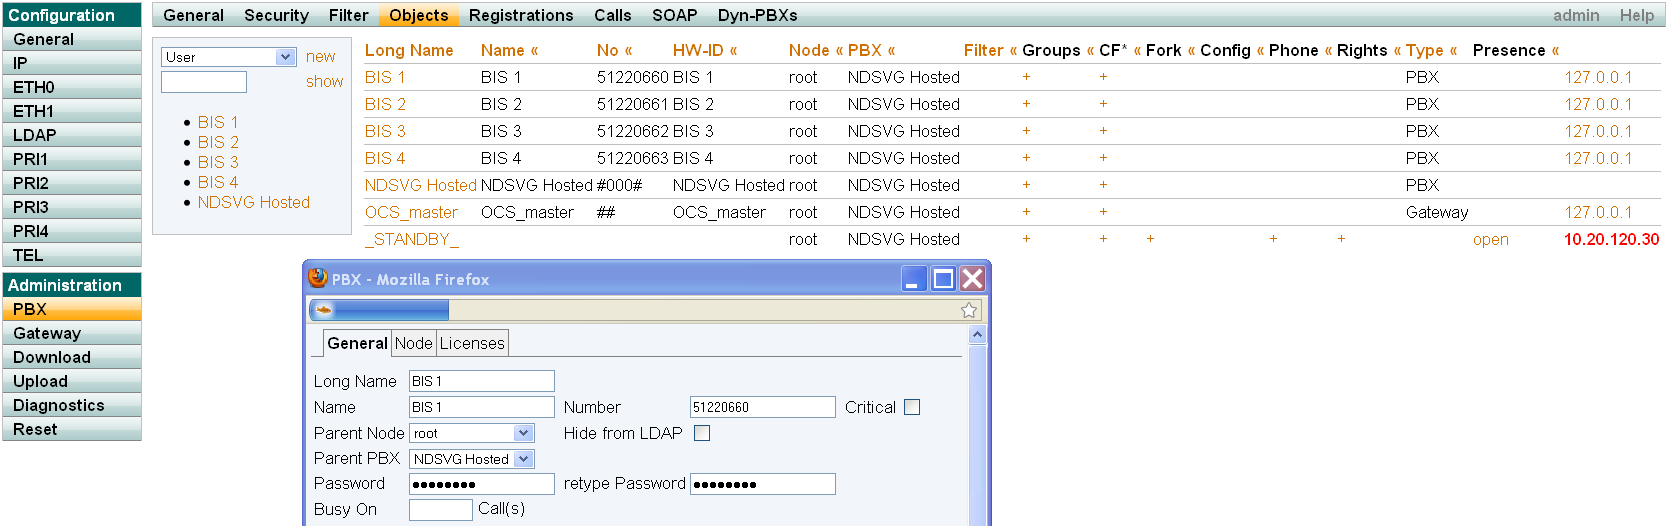 Dynamic - Hosted PBX with SIP trunks 02.png